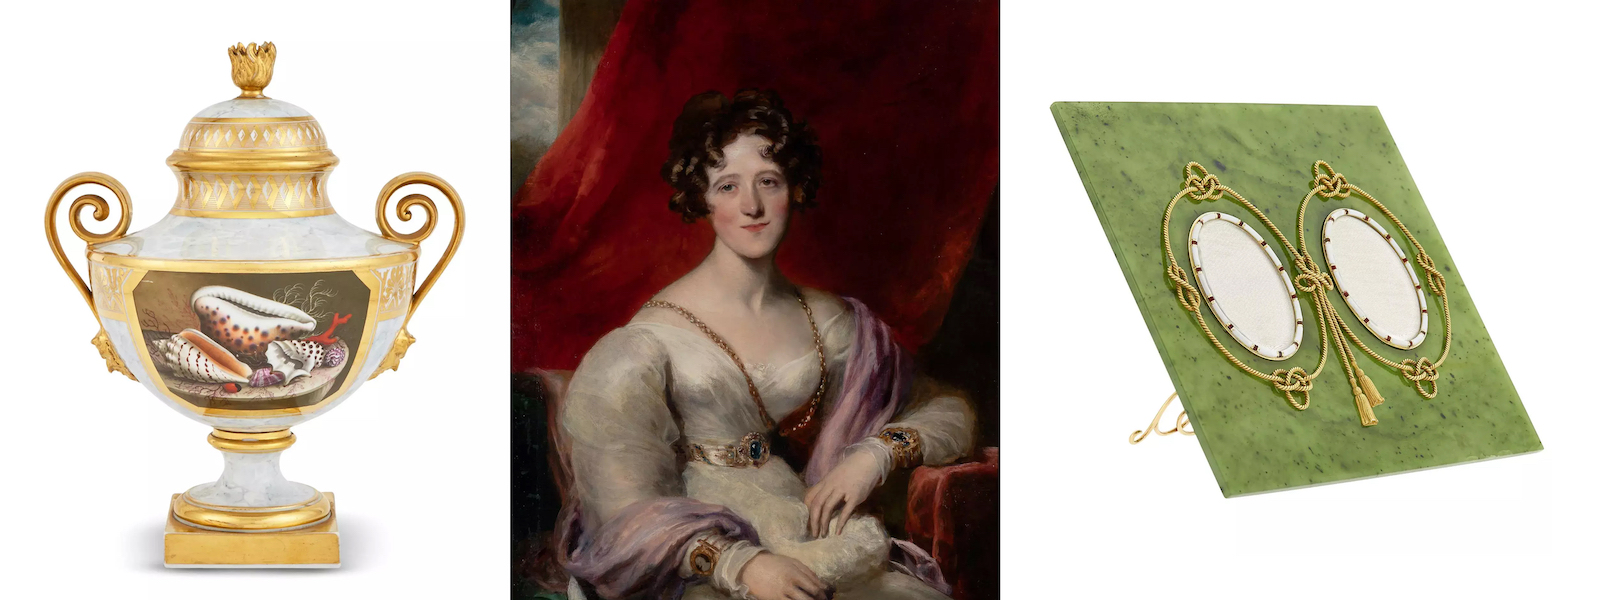 Left, Worcester porcelain covered two-handled urn by Flight Barr and Barr, $10,710; center, Thomas Lawrence’s 1827 portrait of Mary-Anne Capel, $15,120; right, Faberge nephrite double photograph frame by Henrik Wigstrom, $34,650